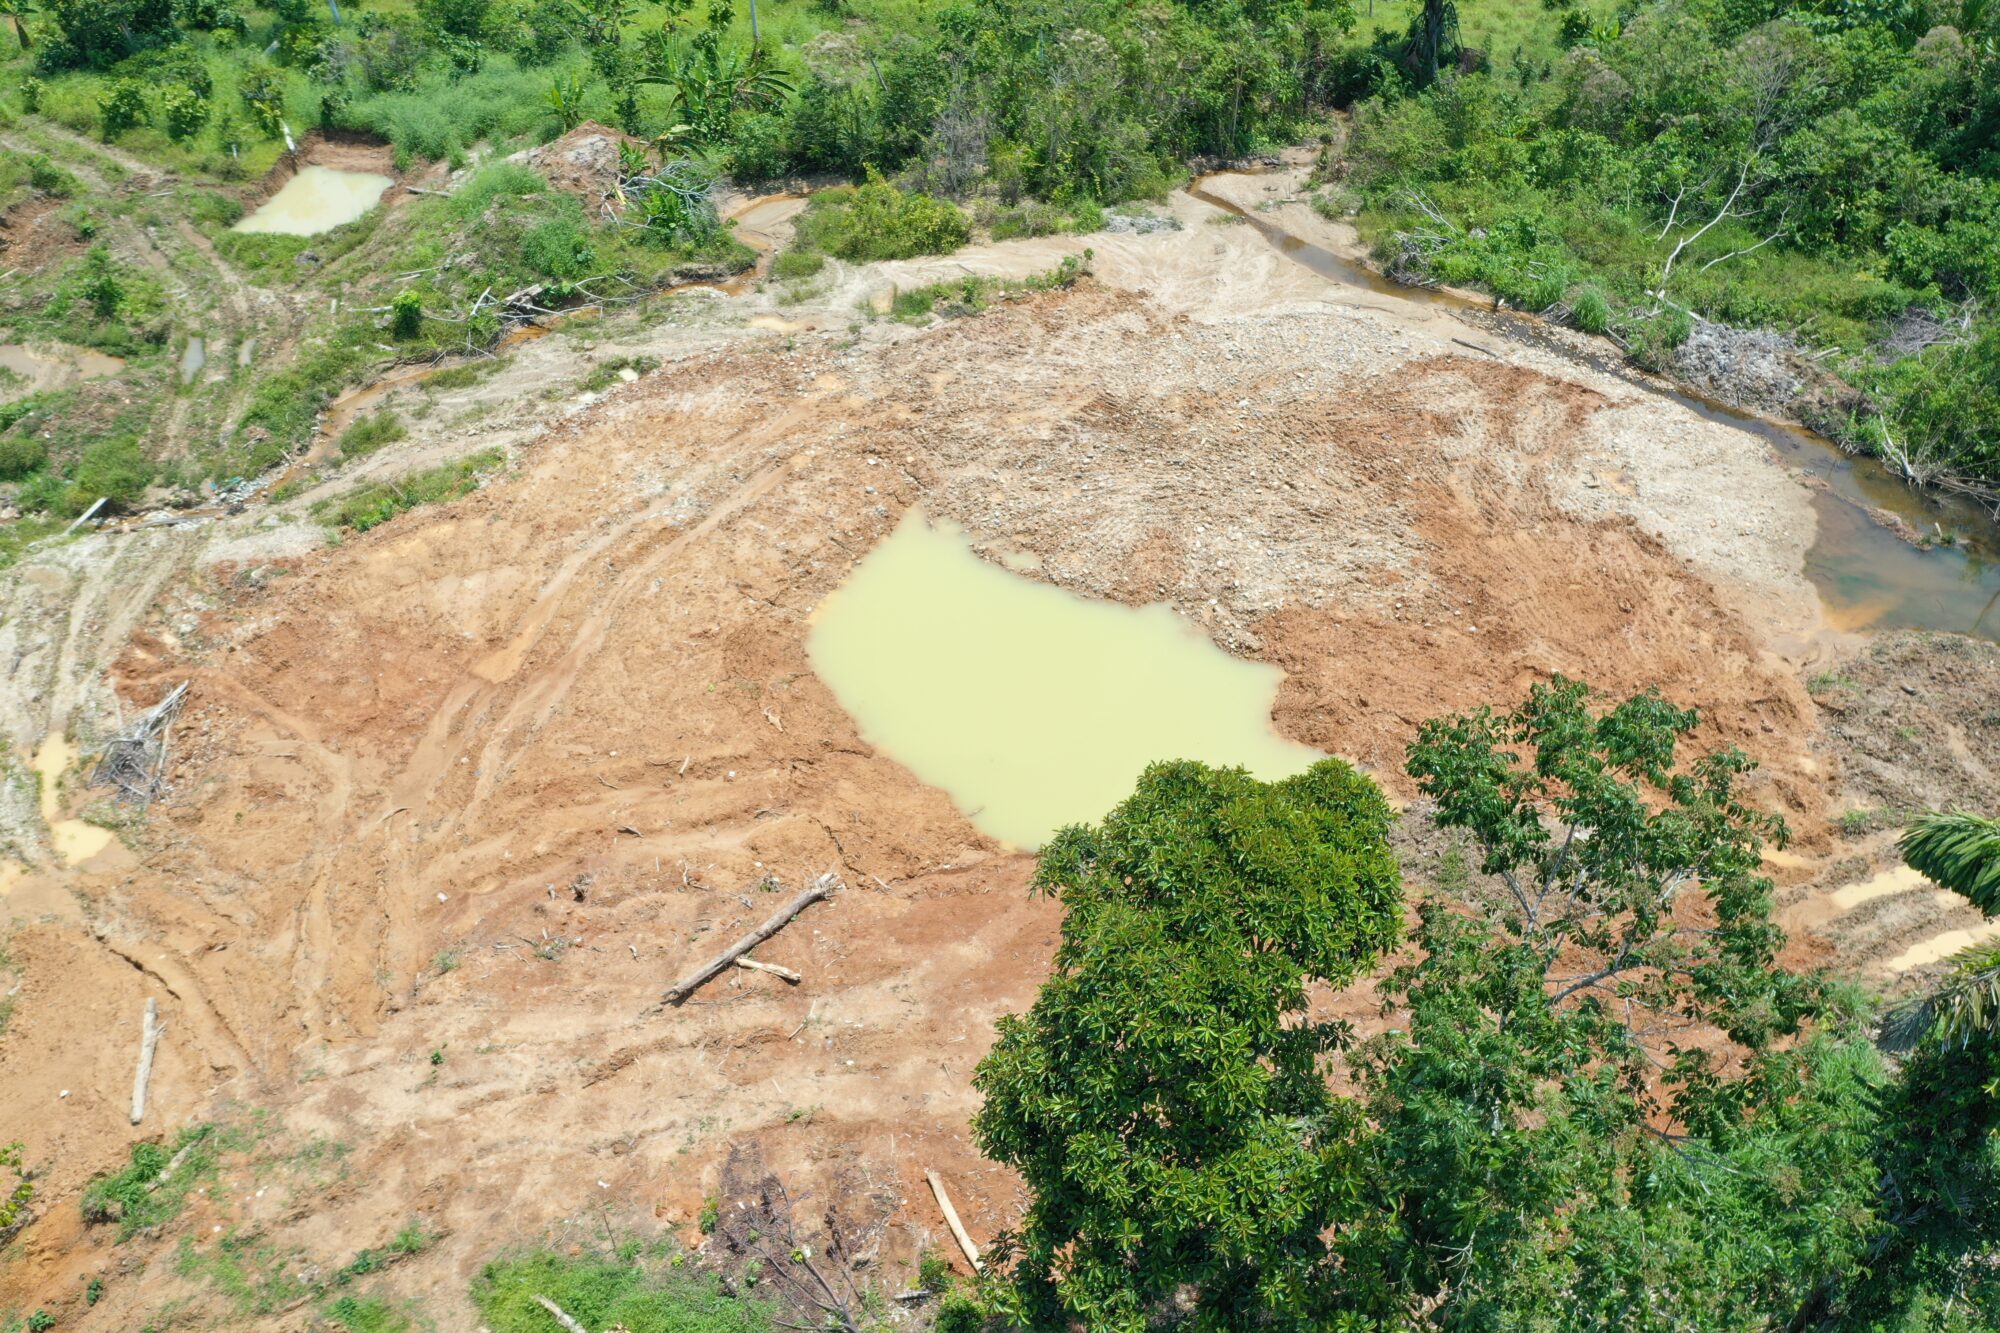 Contaminated waters and destruction from illegal mining activities at Ahuano, on Ecuador's Napo River